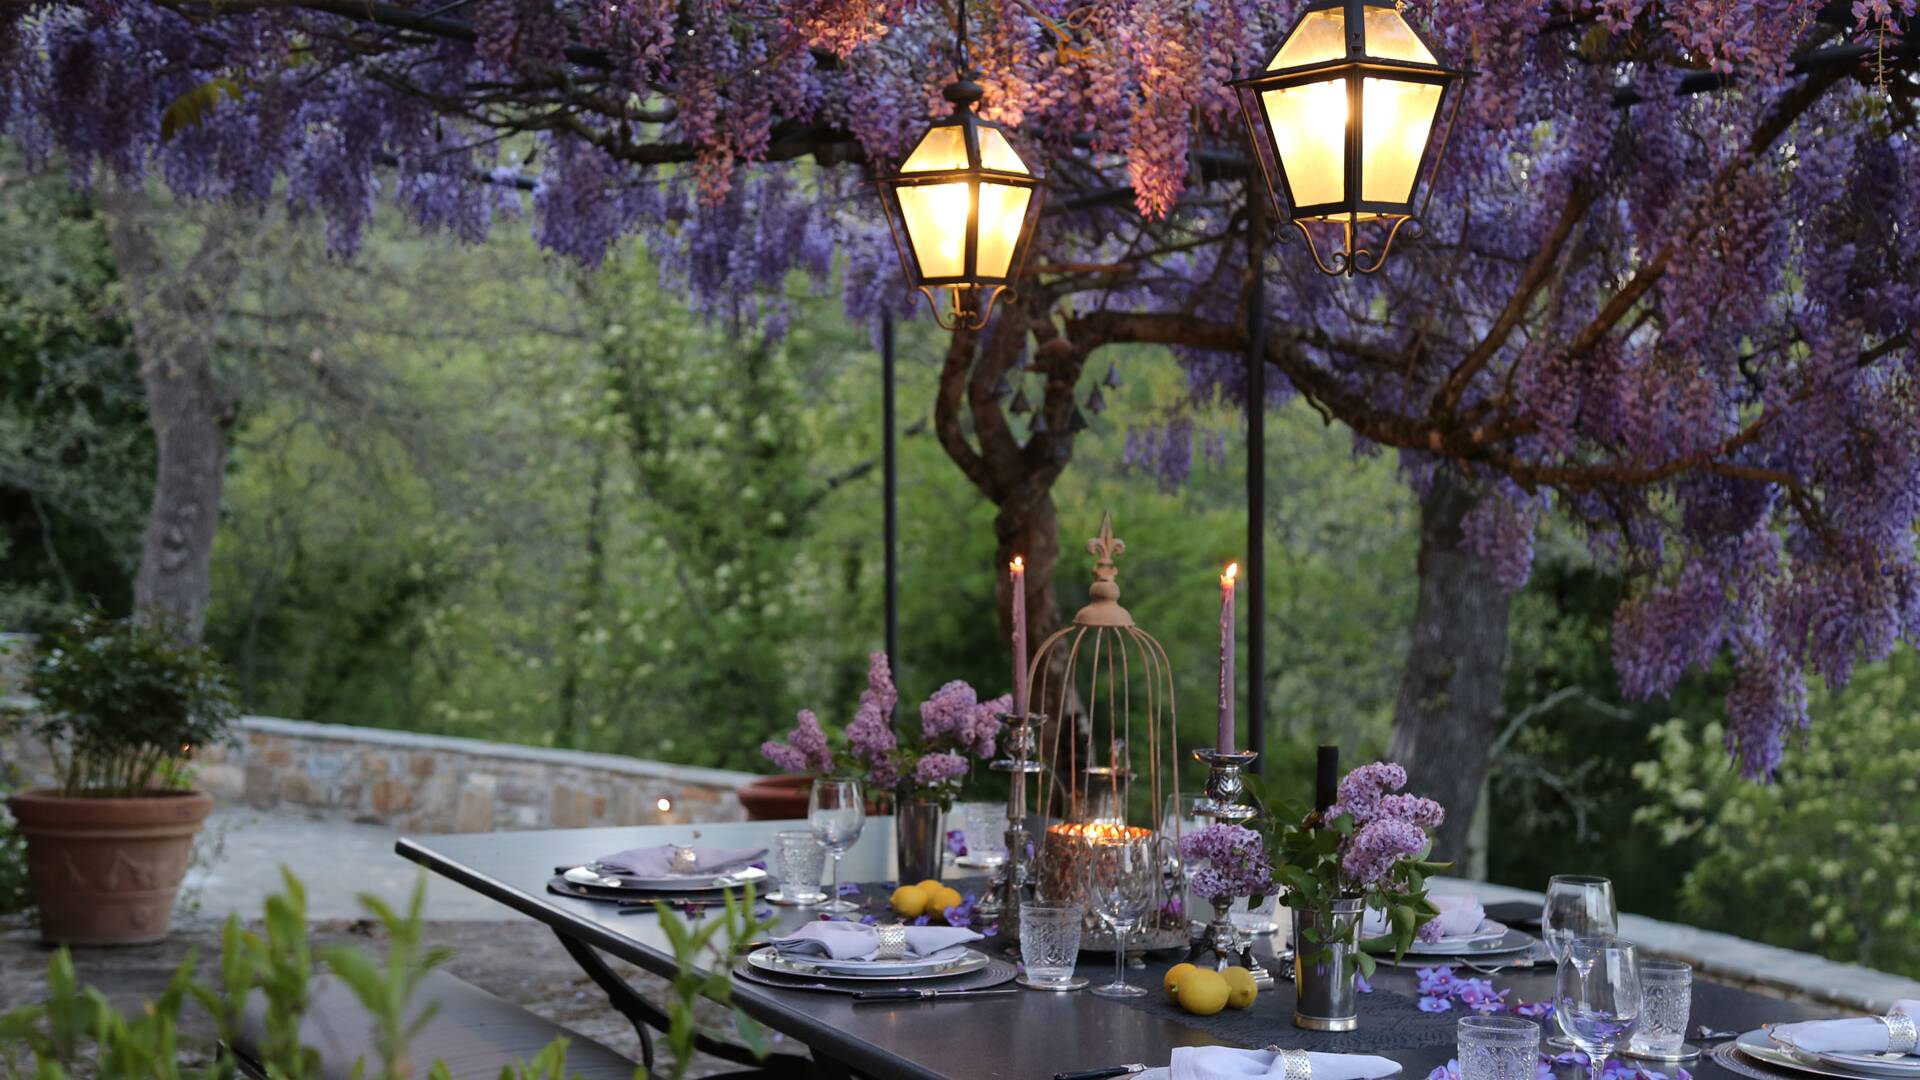 Luxury, chic outdoor dining area